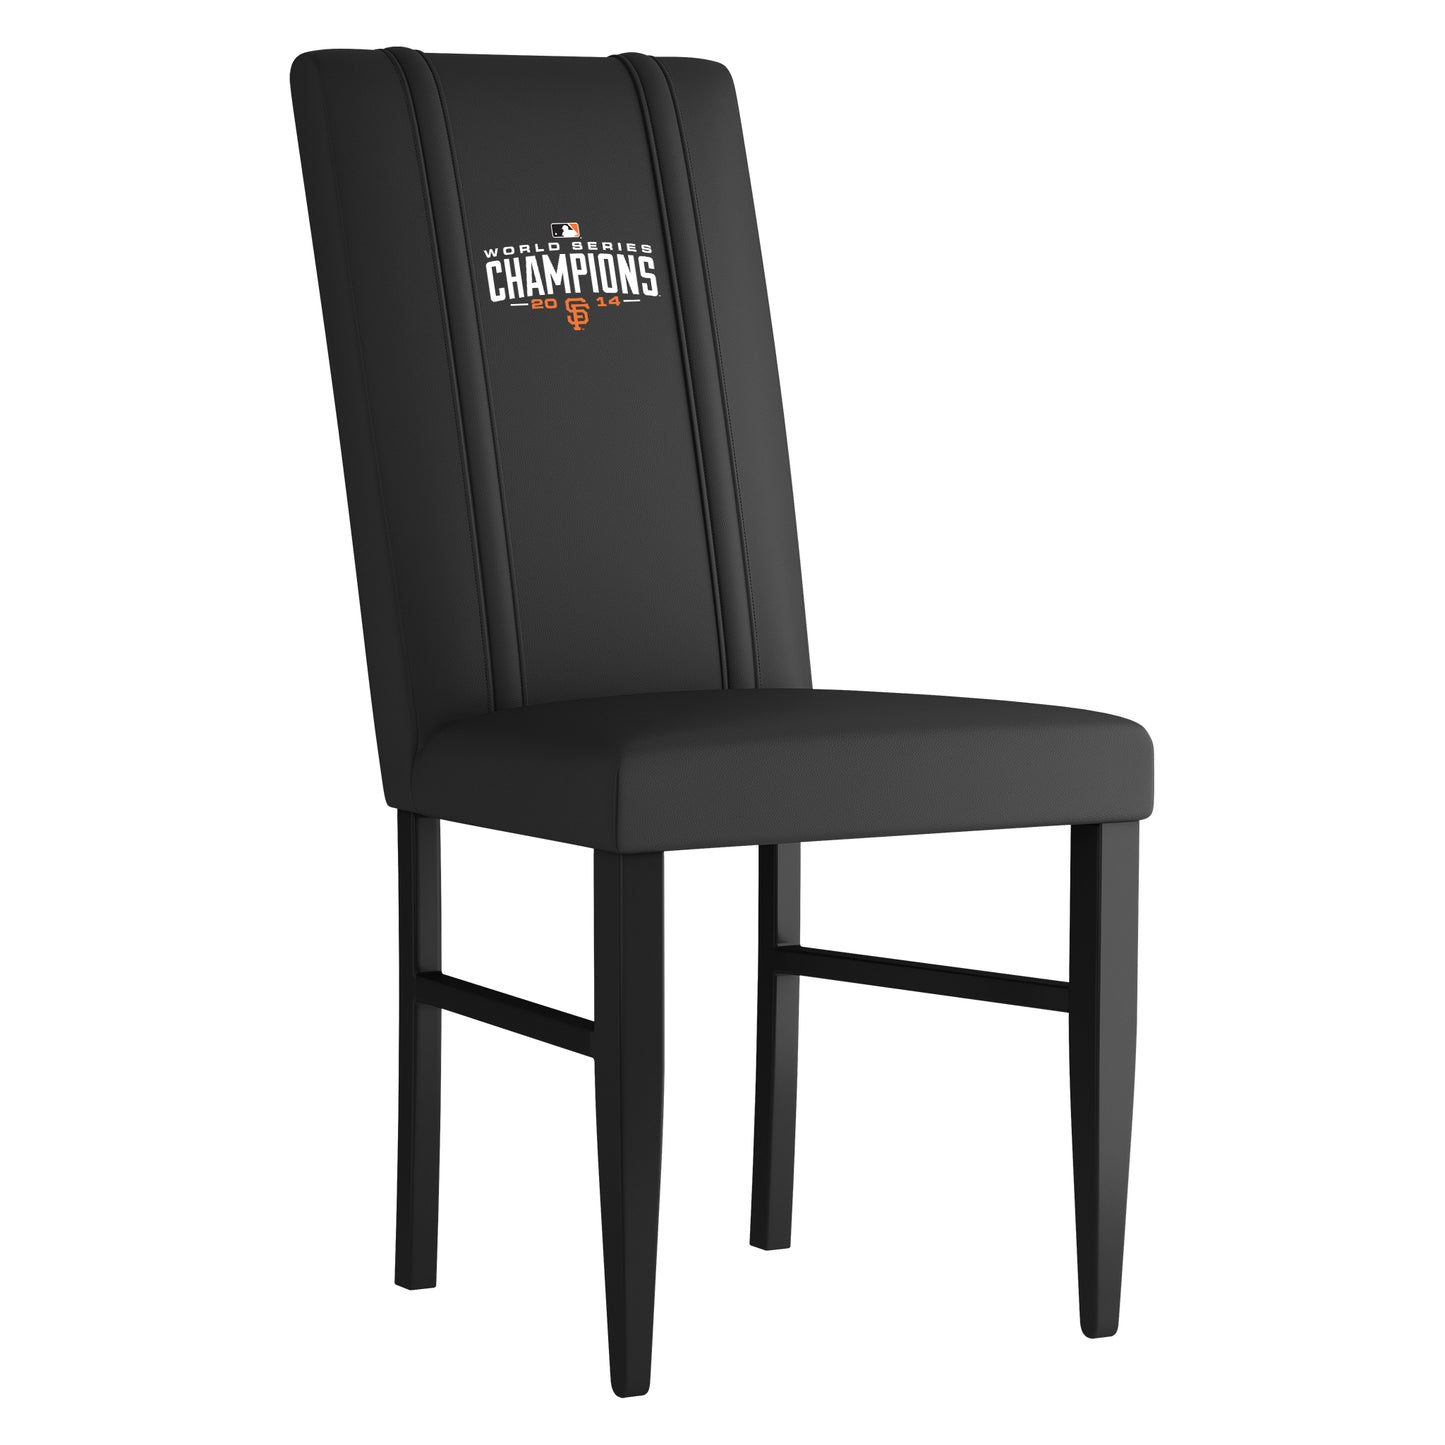 Side Chair 2000 with San Francisco Giants Champs'14 Set of 2